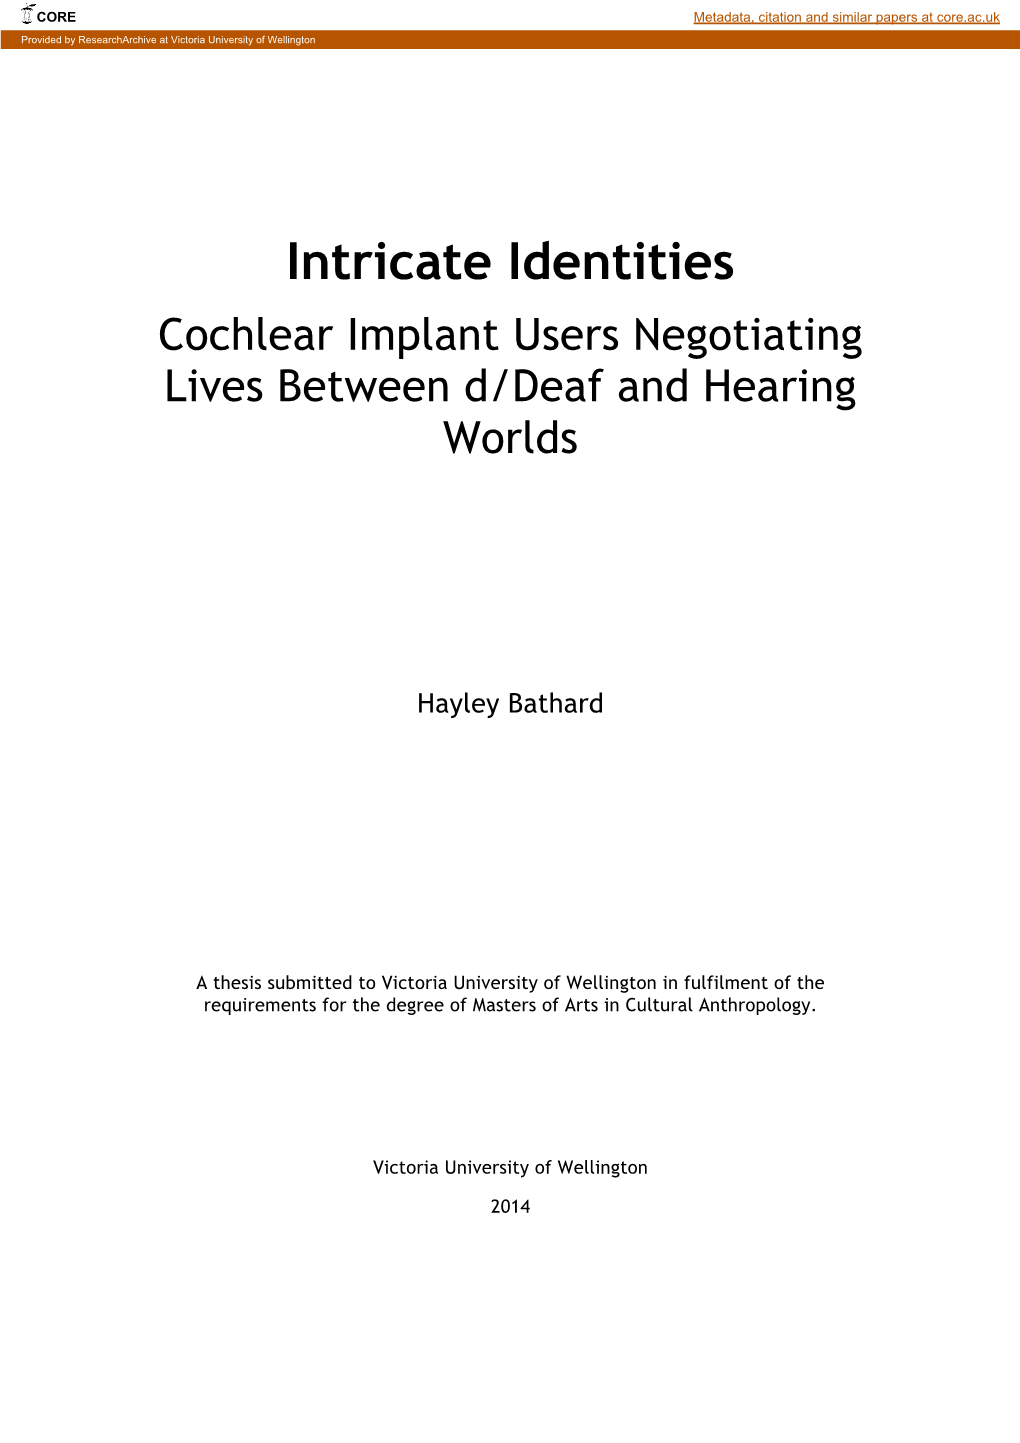 Intricate Identities Cochlear Implant Users Negotiating Lives Between D/Deaf and Hearing Worlds